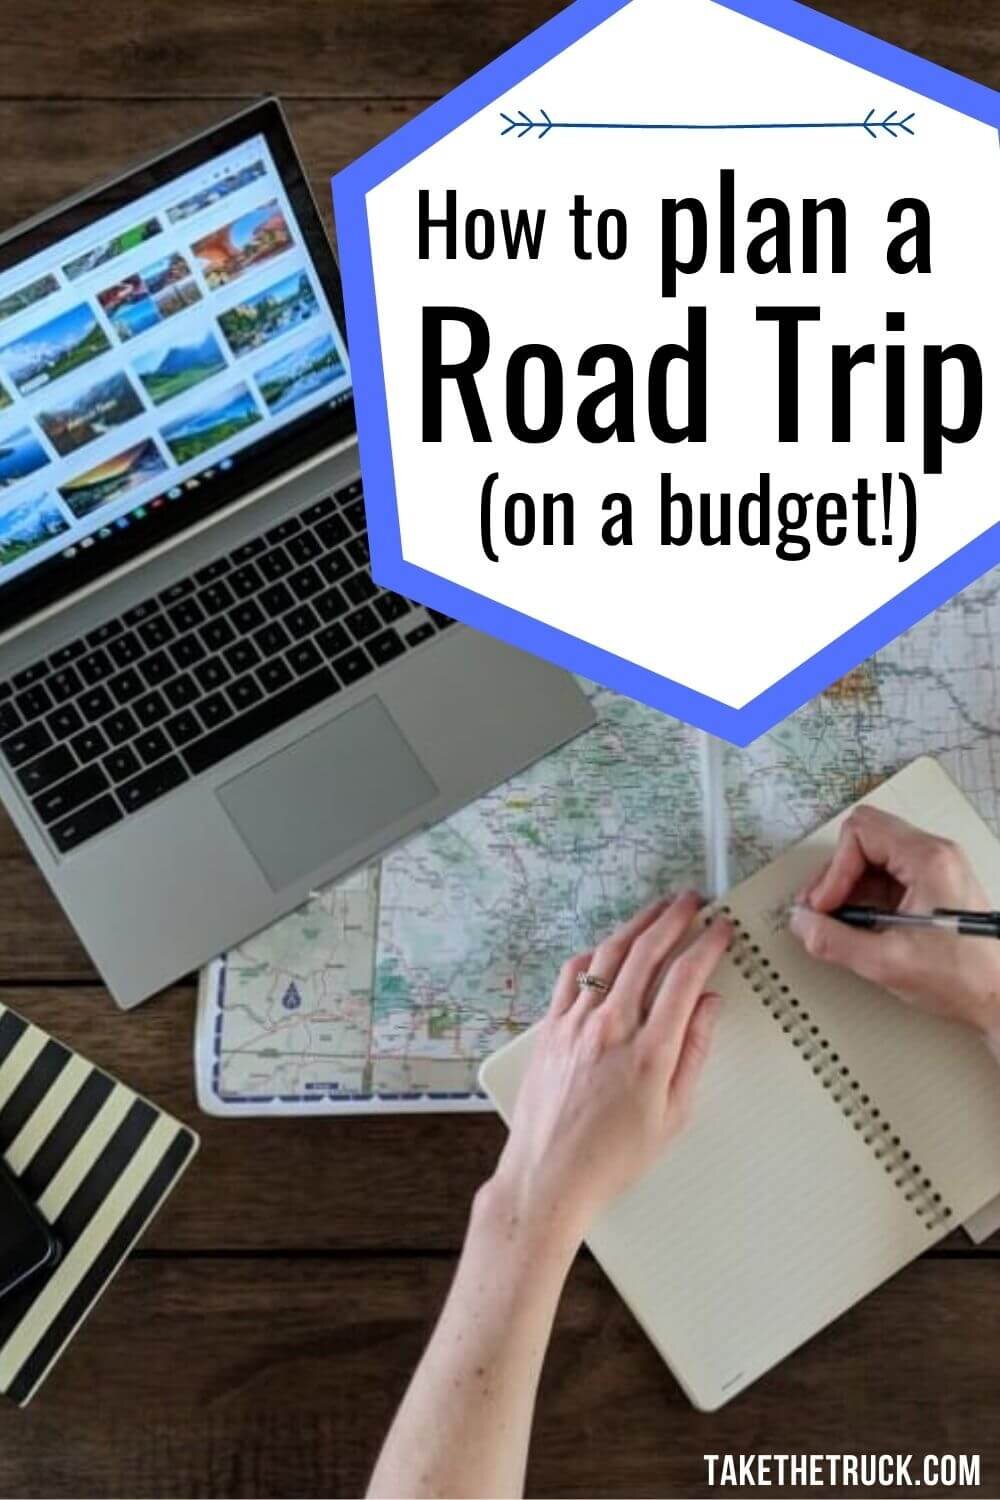 This post will help you figure out how to plan a road trip on a budget. From dreaming to realistic planning based on your individual budget, we’ll help you finally plan and take that road trip!